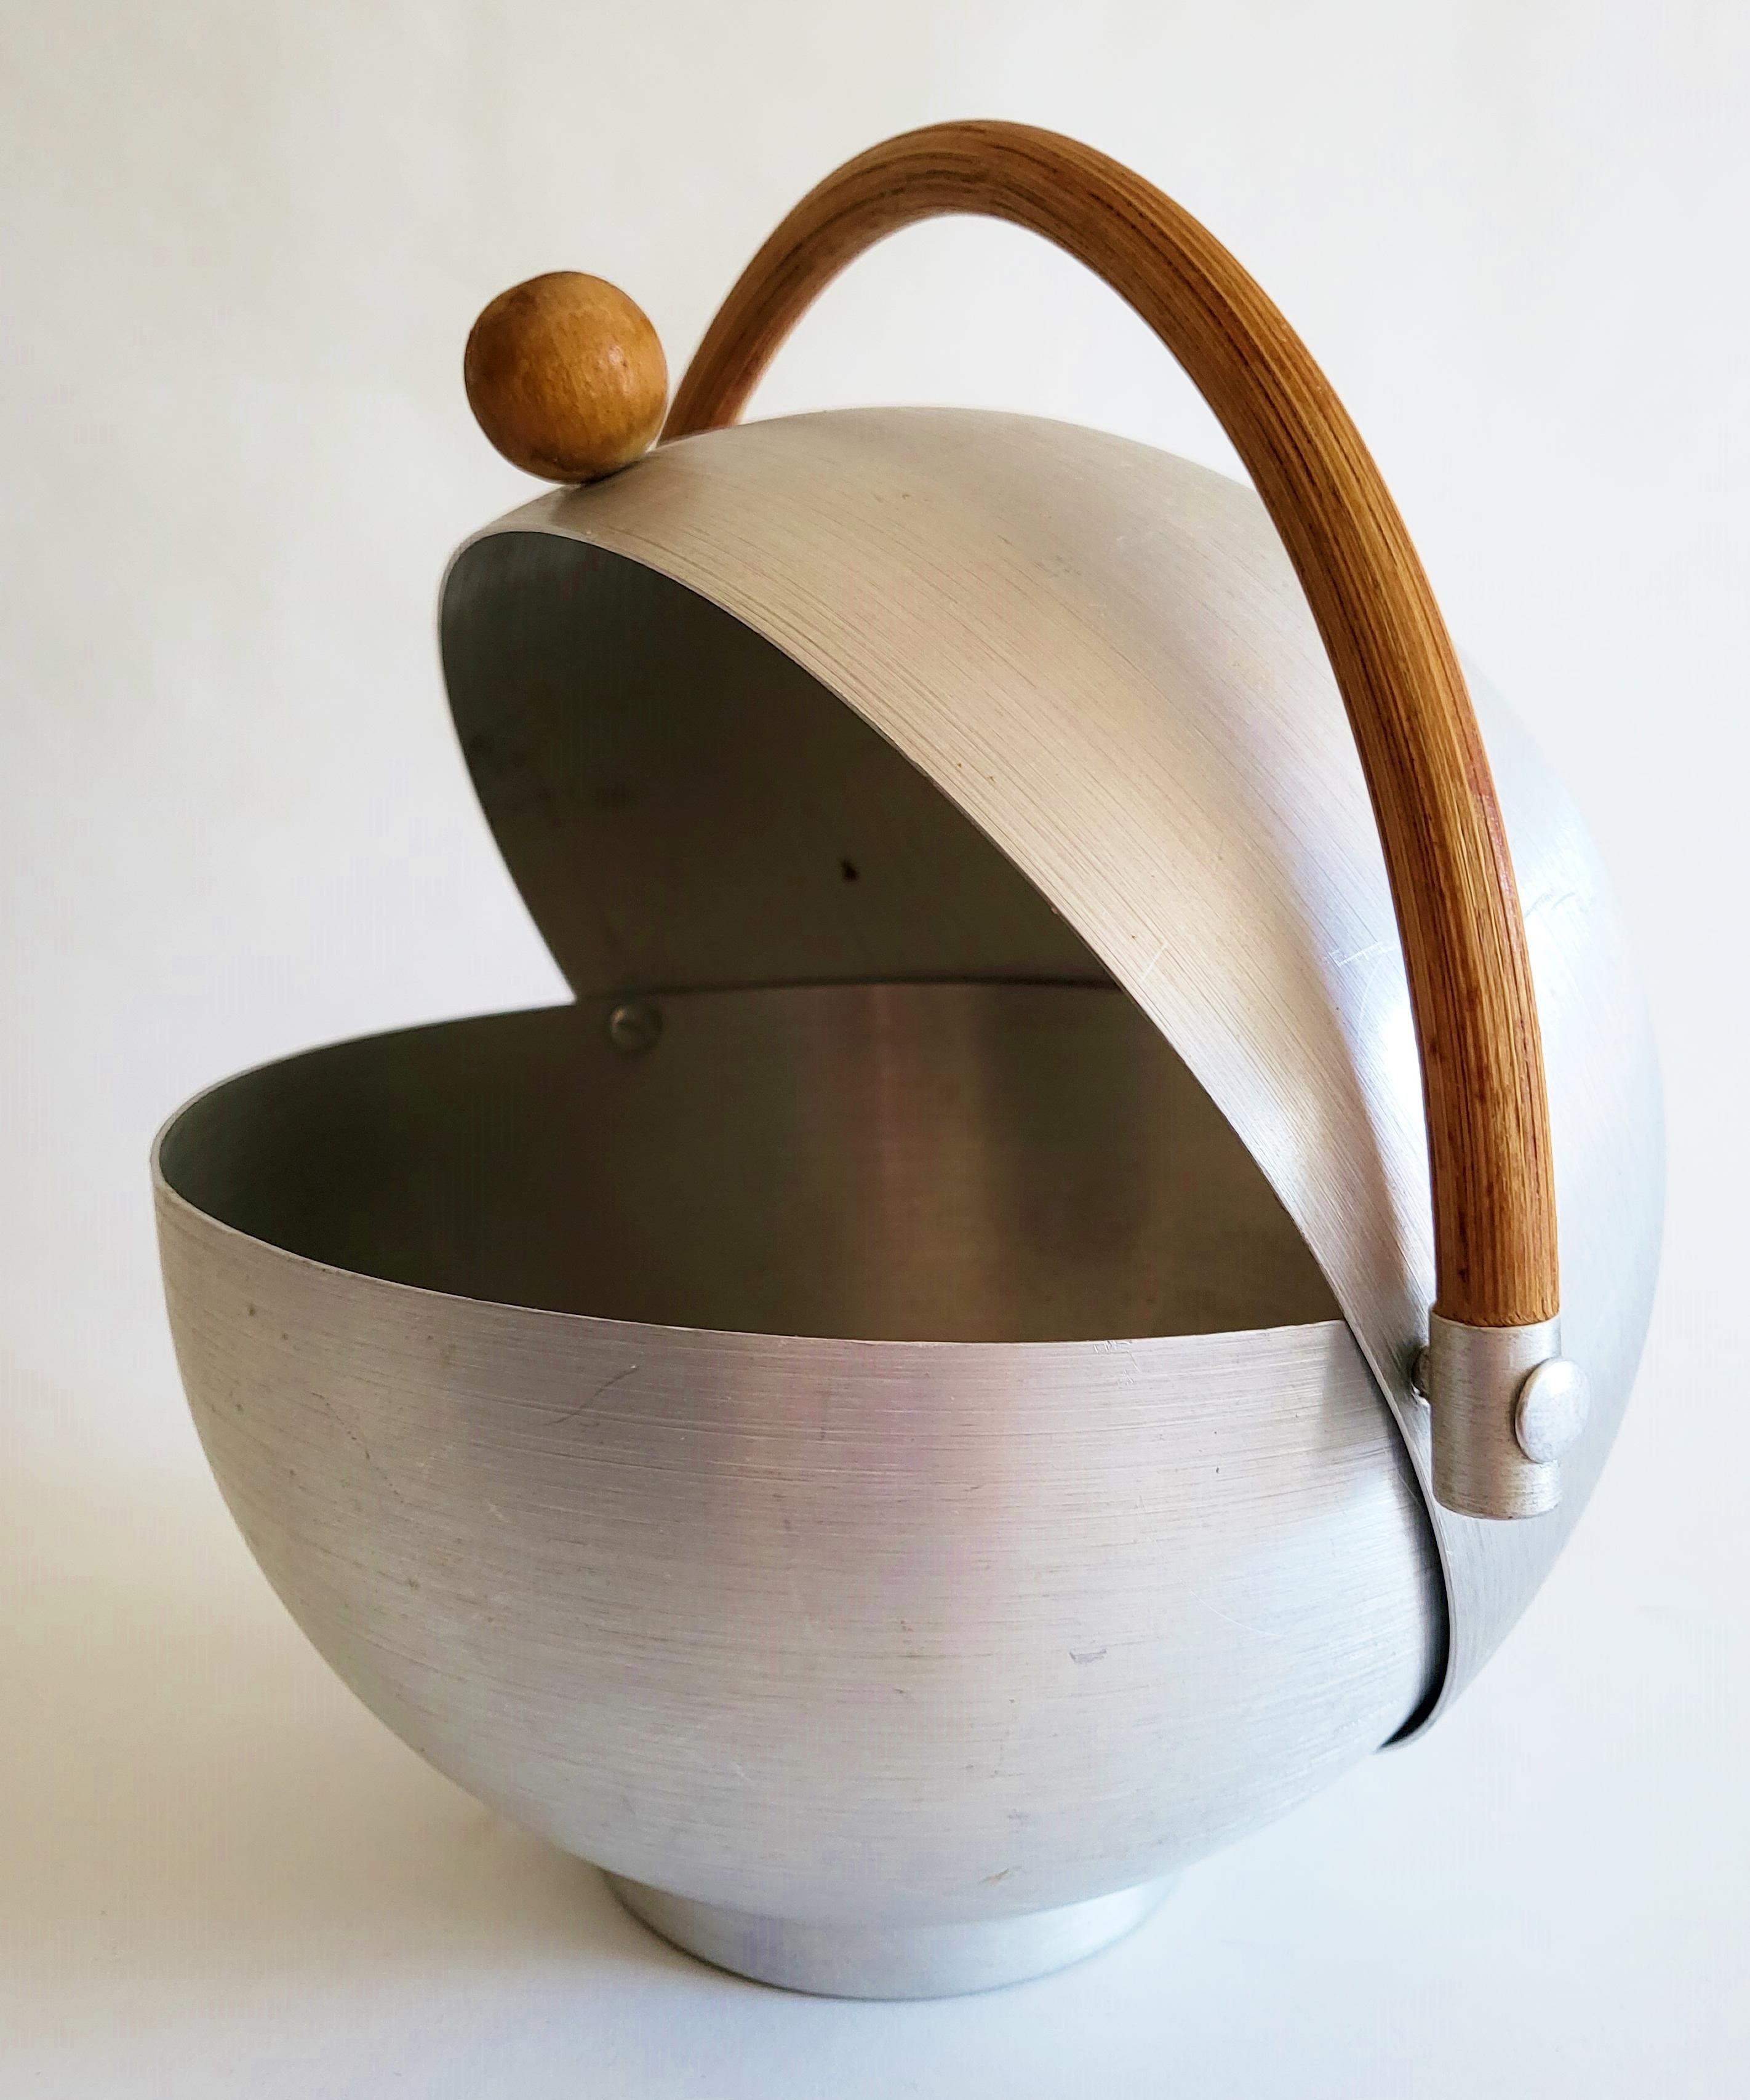 American Art Deco Spun Aluminum & Reed Spherical Muffin Warmer by Russel Wright. In Good Condition For Sale In Port Hope, ON